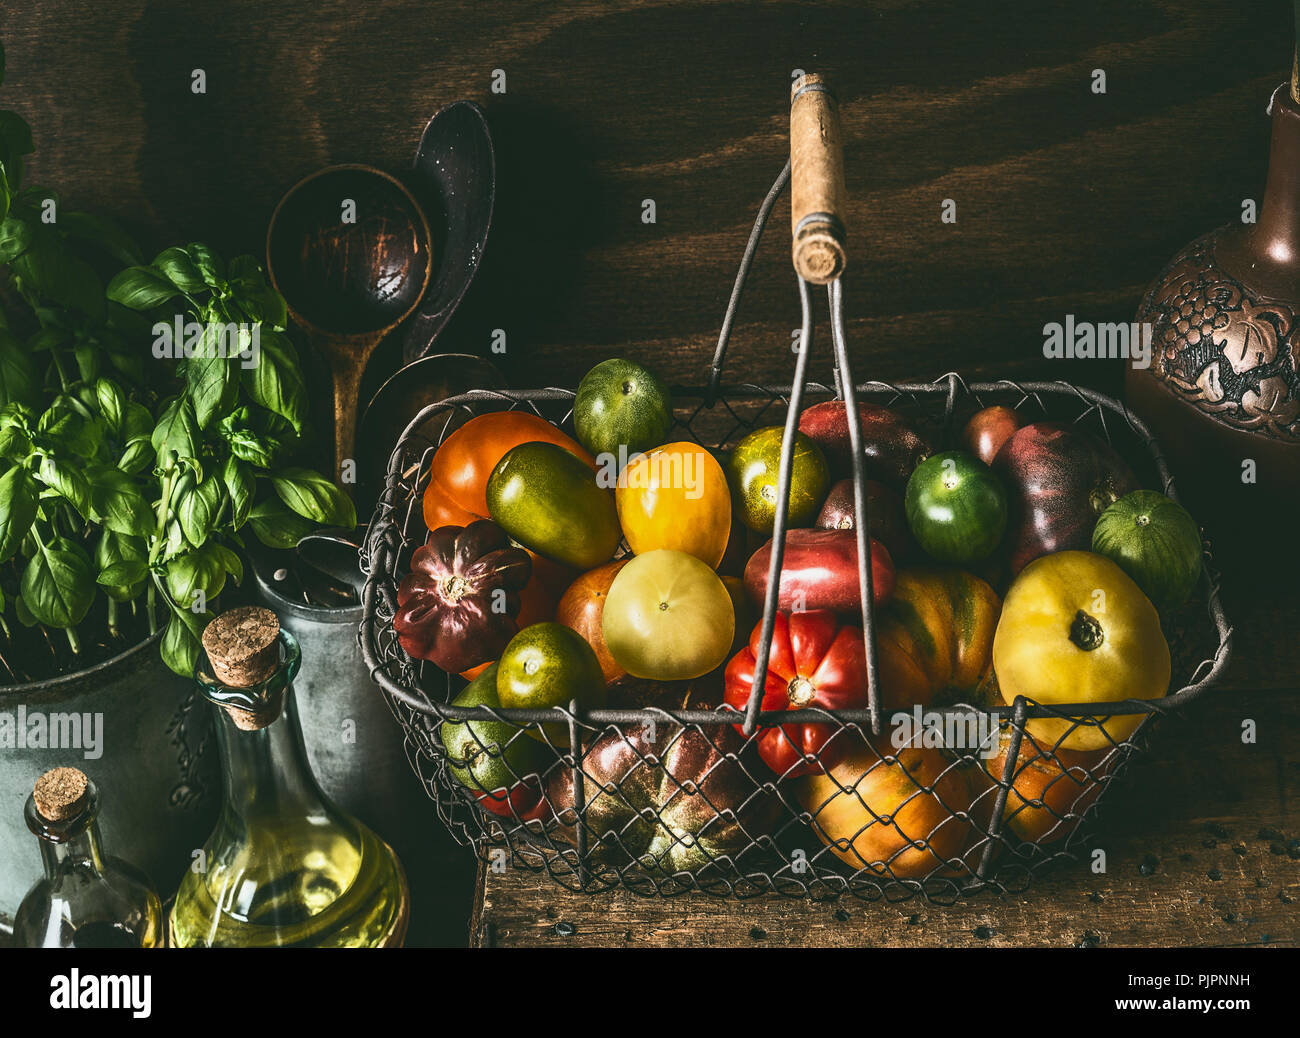 Colorful organic tomatoes in harvest basket on dark rustic kitchen table with cooking ingredients. Healthy food concept Stock Photo